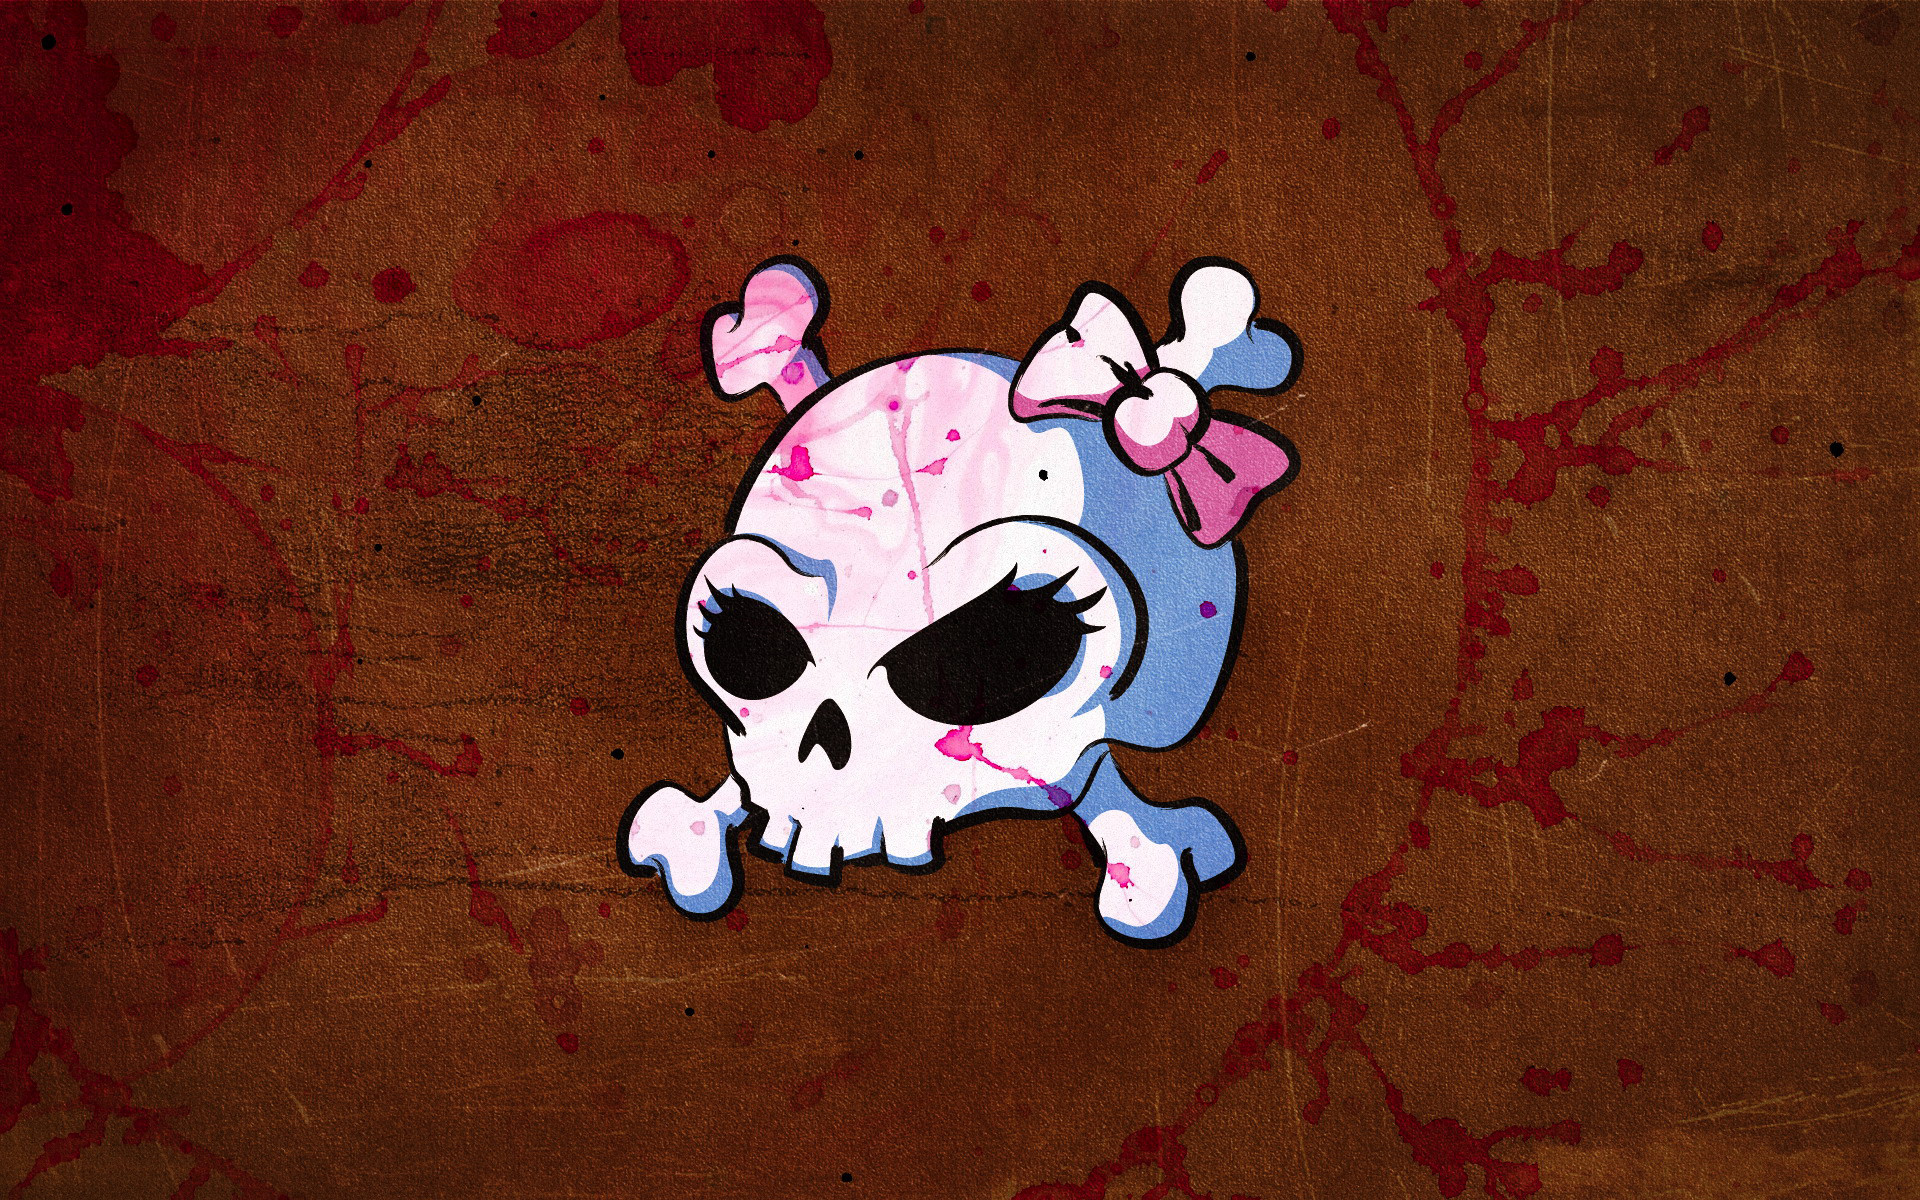 Wallpapers Emo Anime Skull With Pink Bow 1920x1200 #2406060 #emo anime 1920...